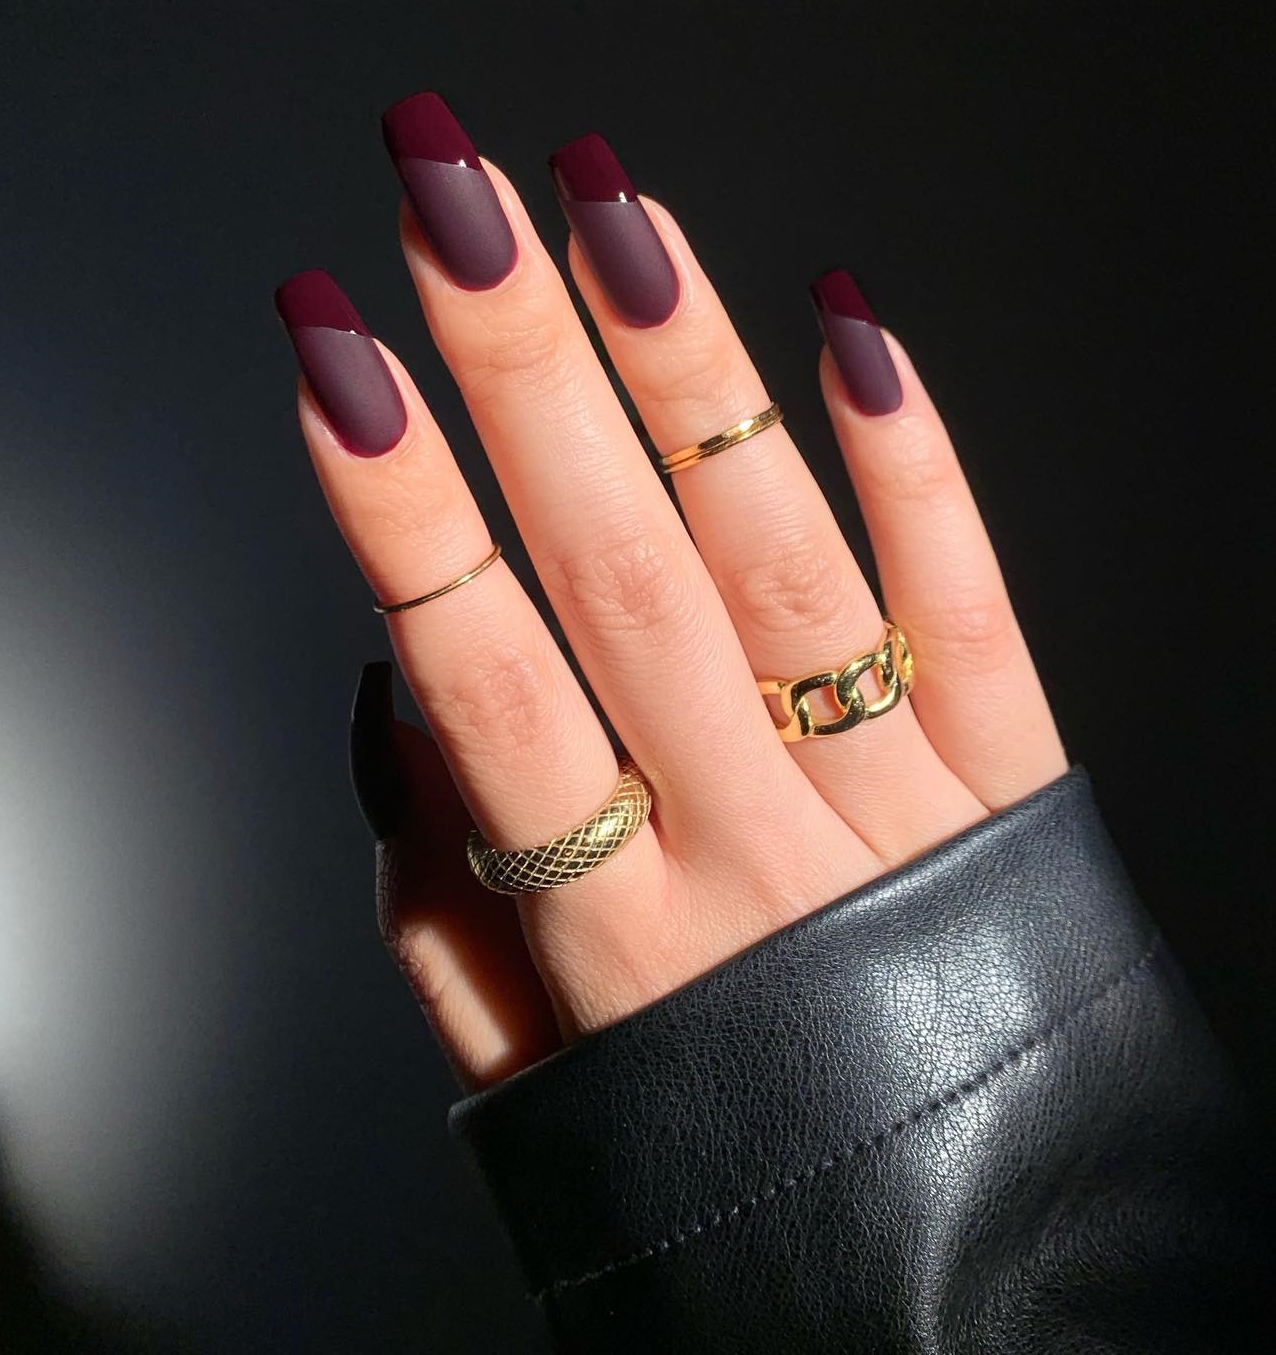 50+ Burgundy Nail Ideas for 2023 - Nerd About Town